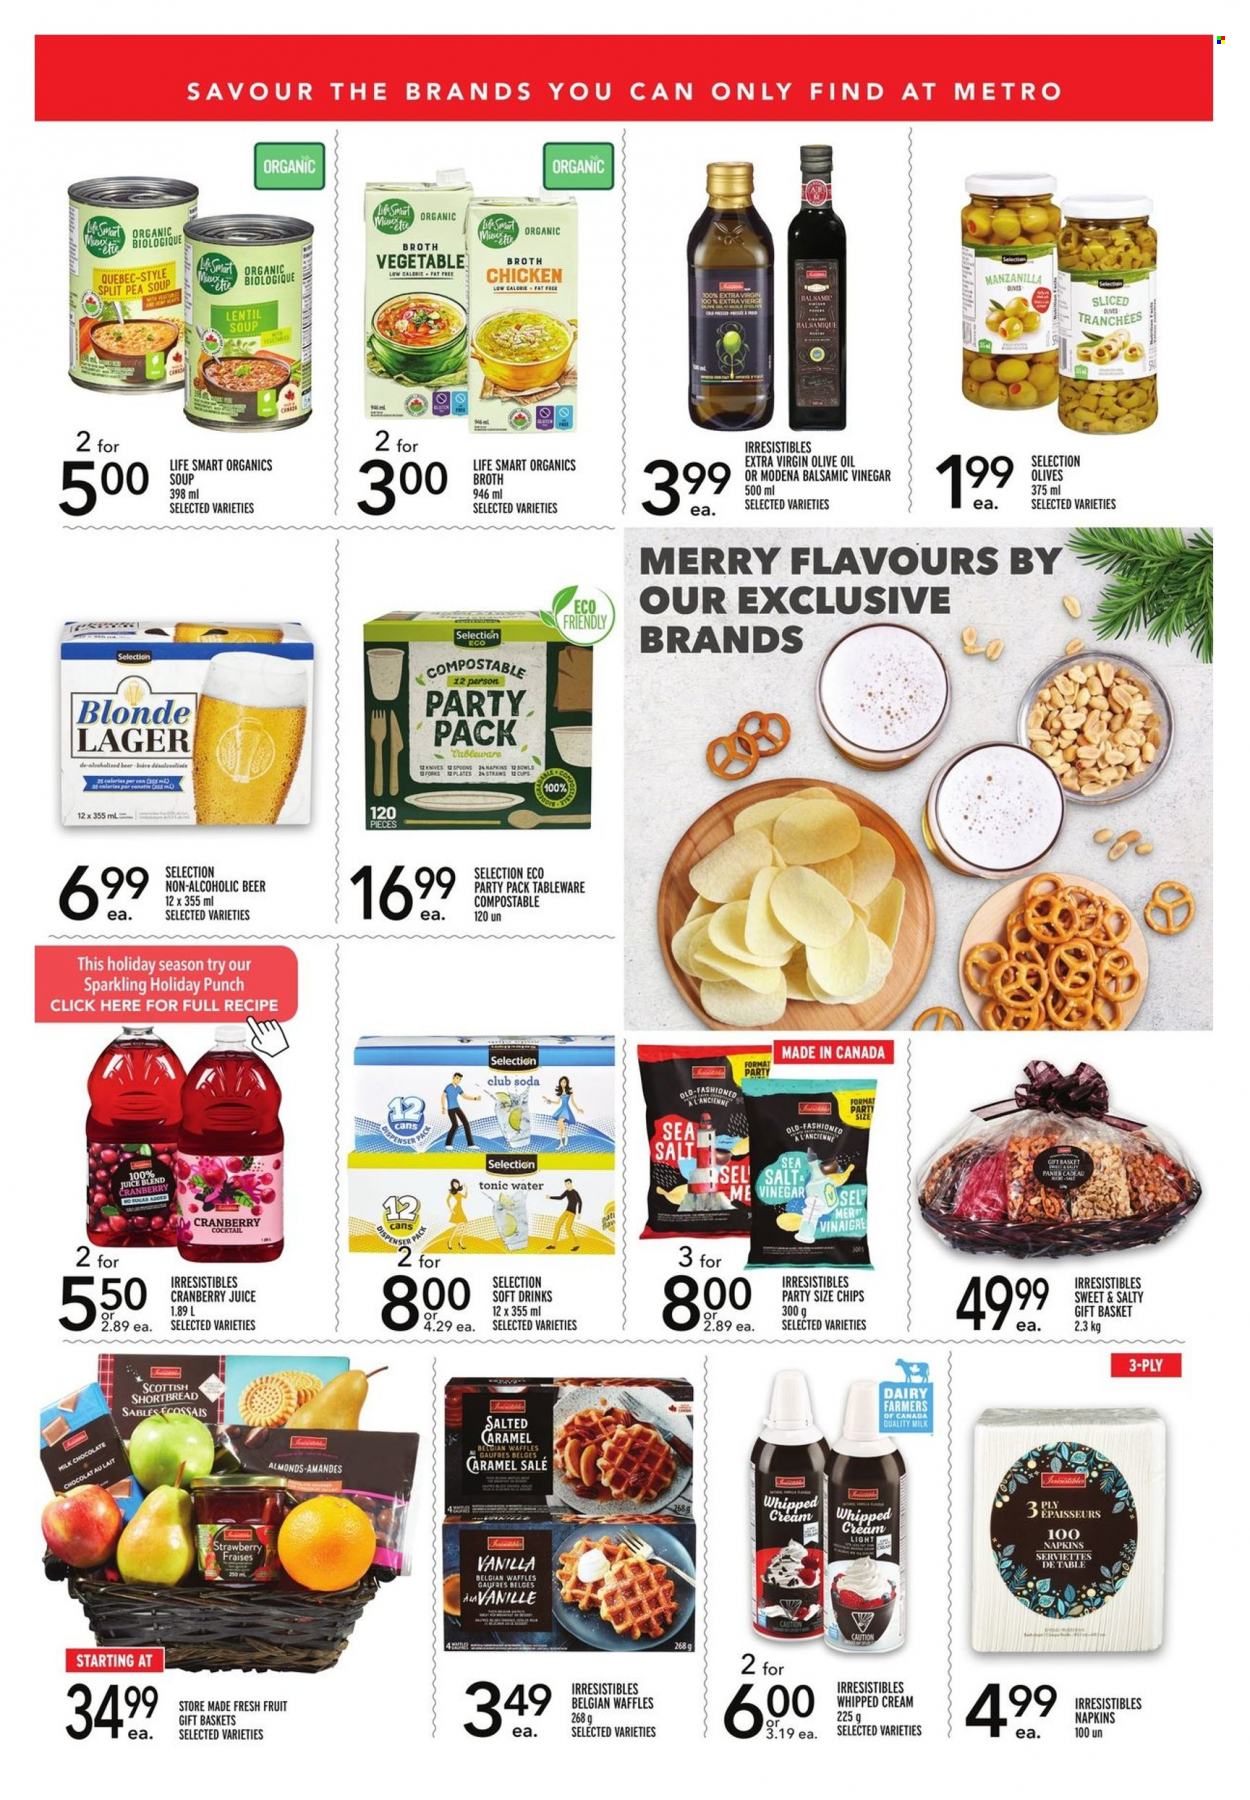 thumbnail - Metro Flyer - November 18, 2021 - December 15, 2021 - Sales products - waffles, soup, whipped cream, milk chocolate, chocolate, broth, caramel, balsamic vinegar, extra virgin olive oil, olive oil, almonds, cranberry juice, juice, tonic, soft drink, Club Soda, punch, beer, Lager, napkins, basket, spoon, tableware, plate, olives, chips. Page 4.